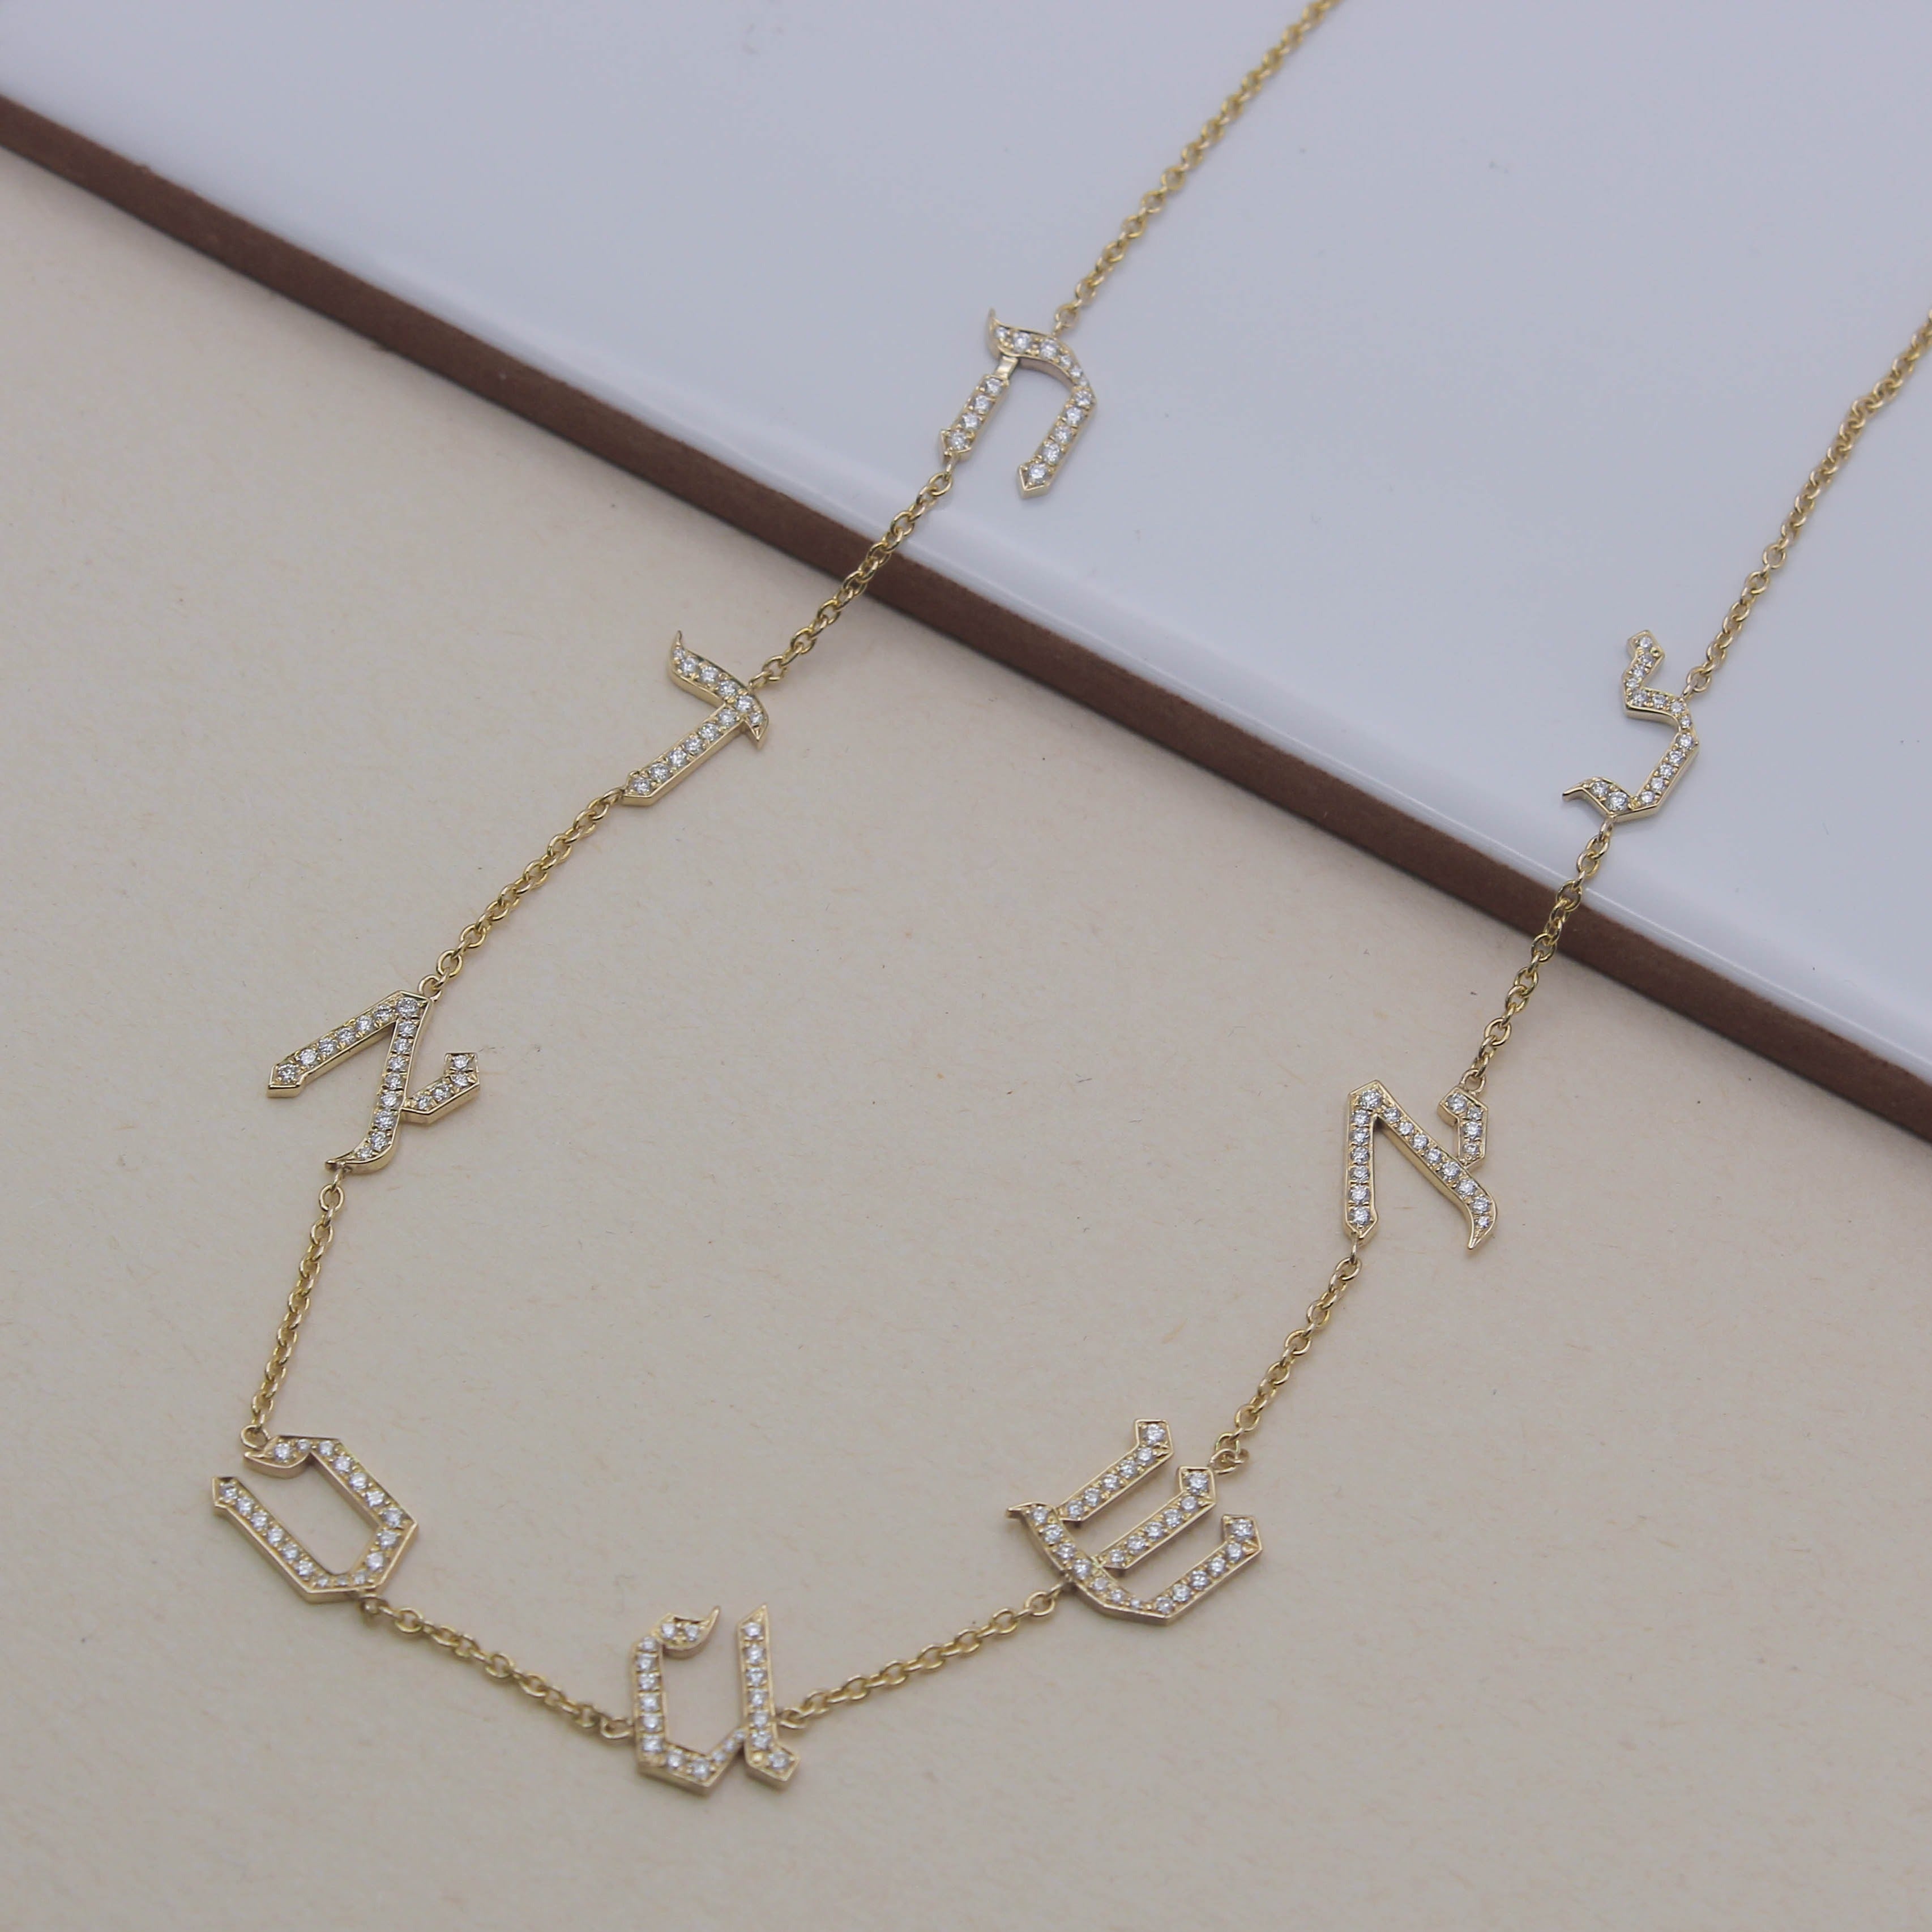 Eight letters necklace set with diamonds